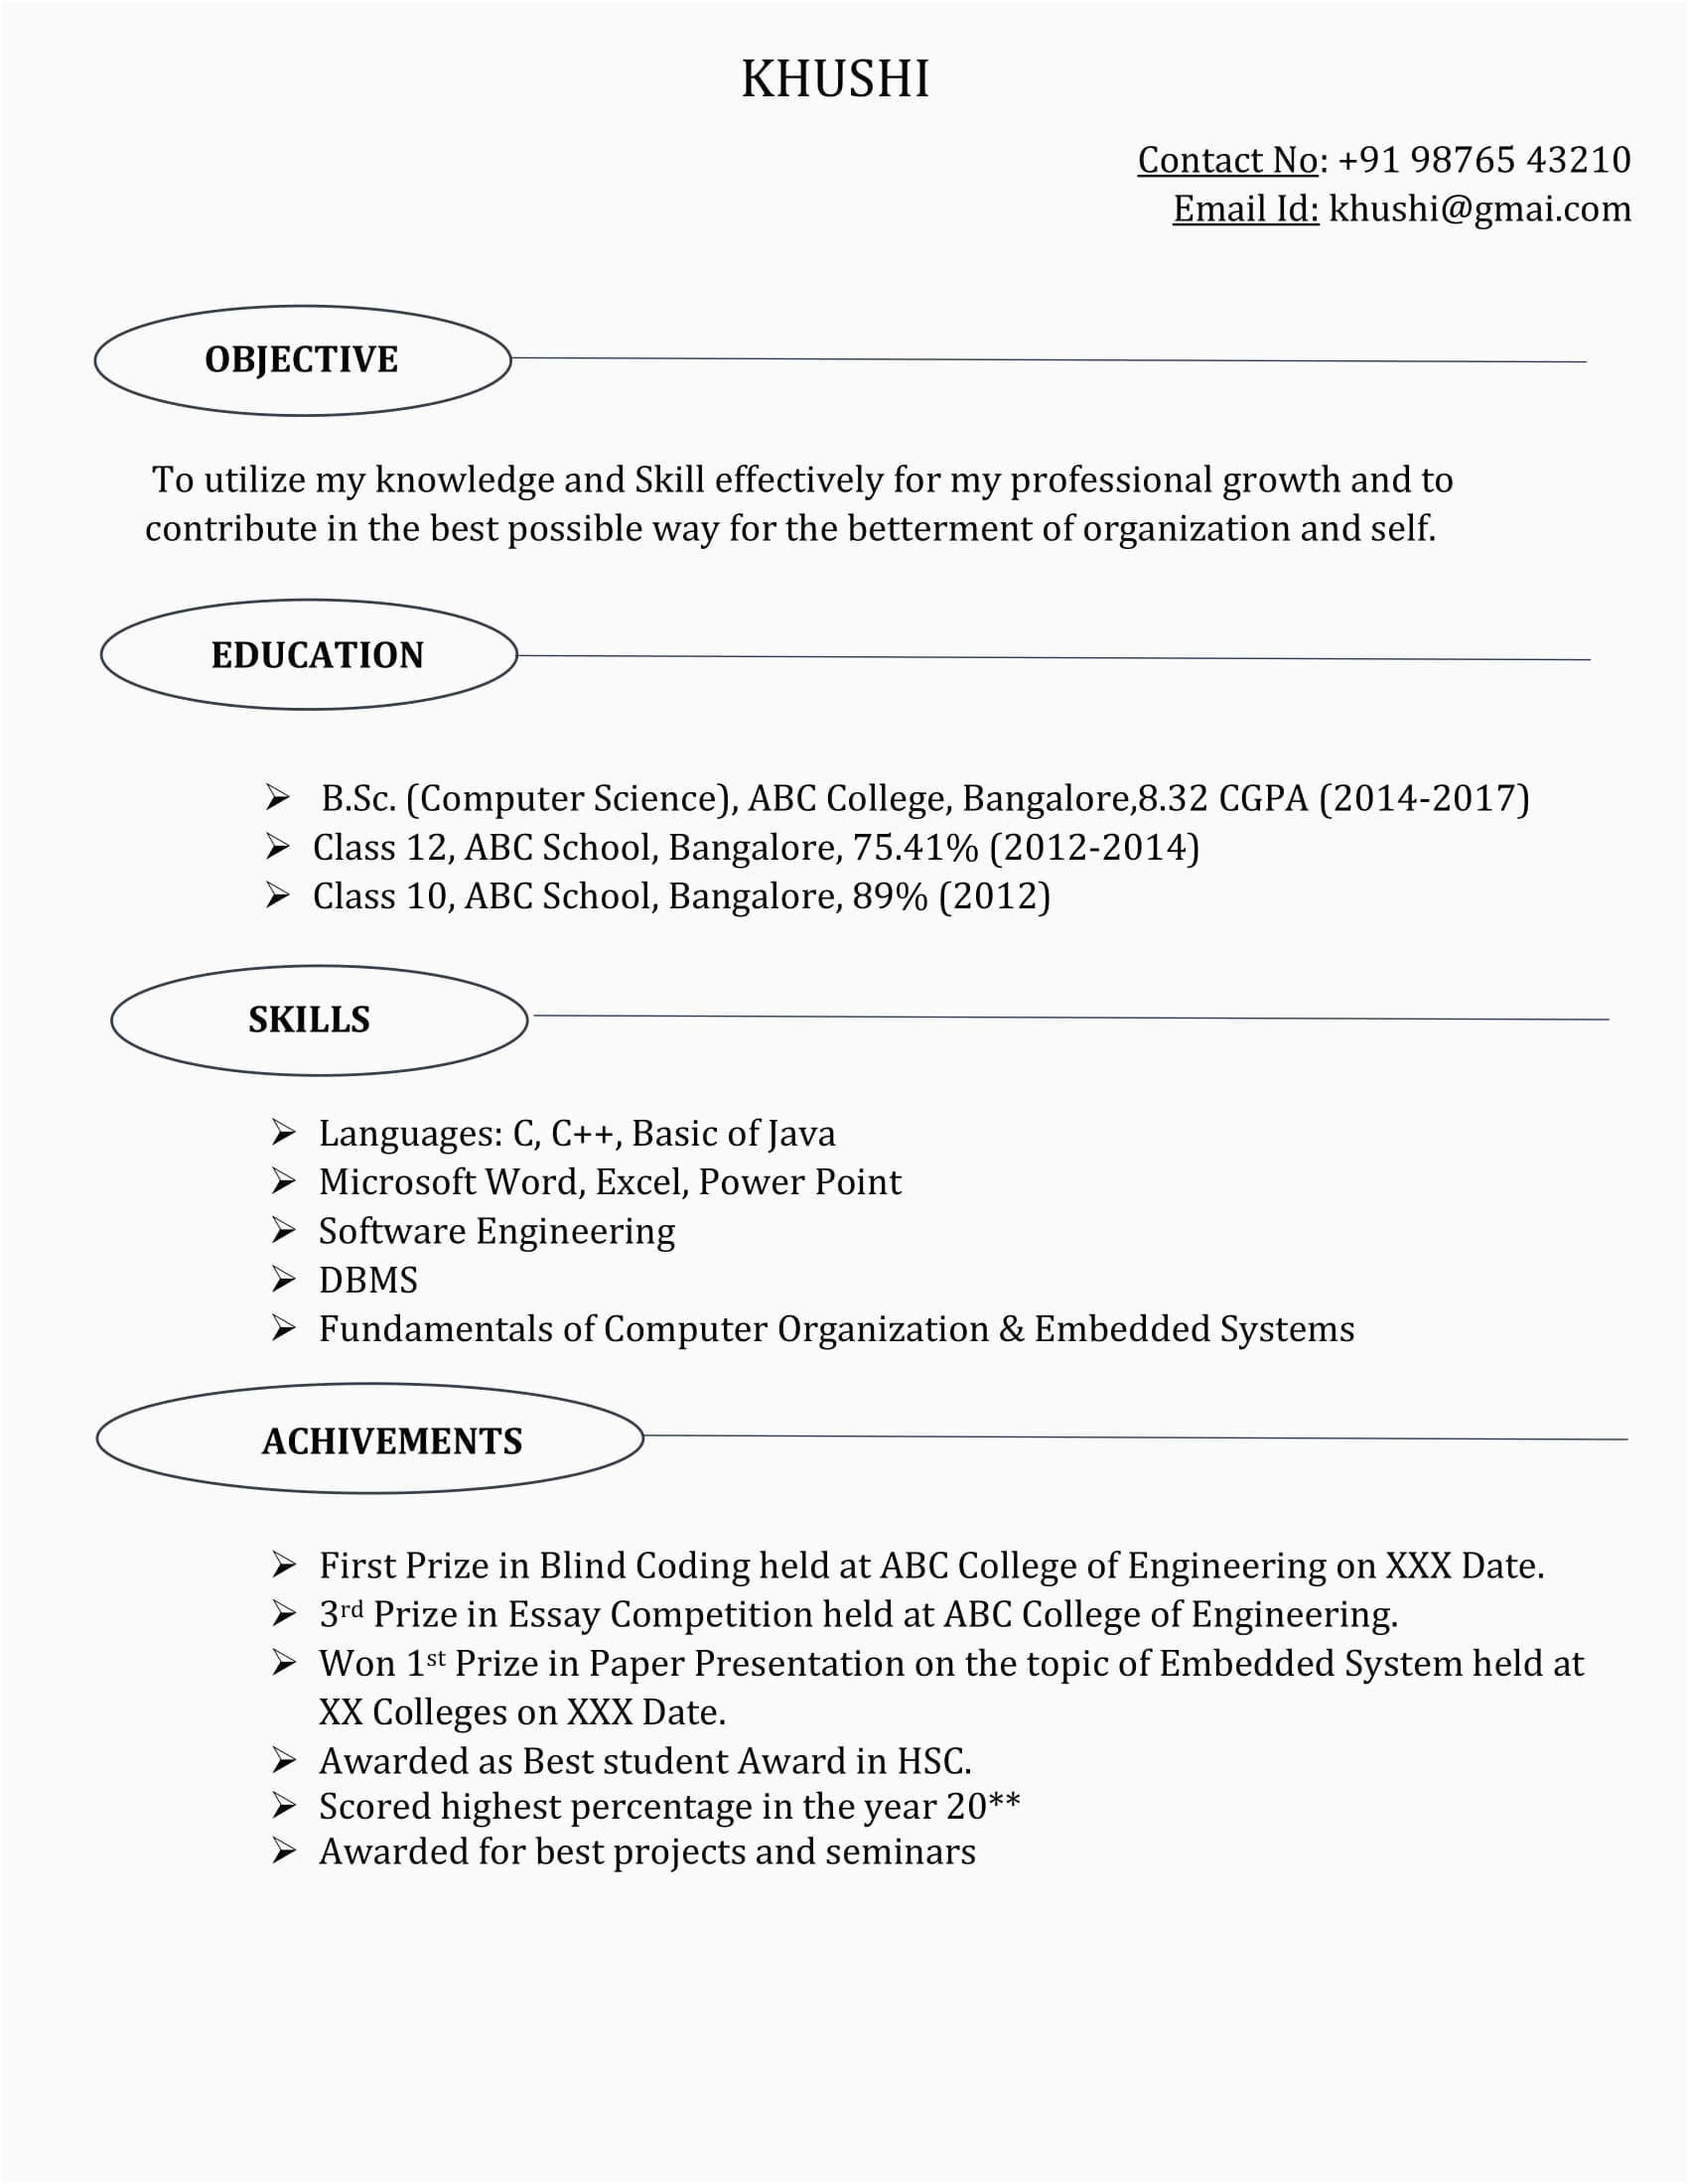 Resume Samples for Bsc Computer Science Fresher B Sc Puter Science Resume Template 4 In Word